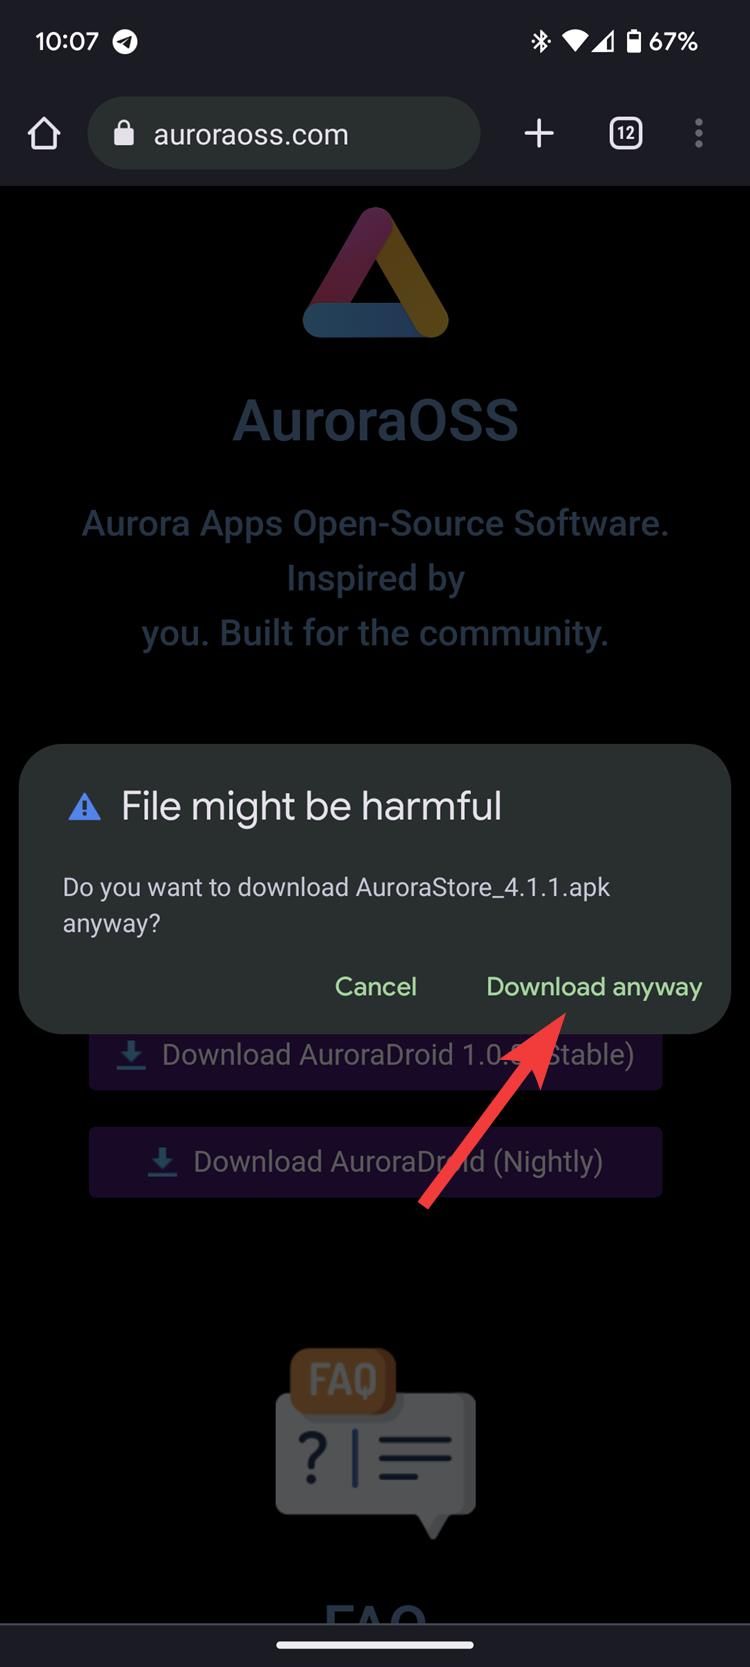 A File might be harmful dialog box with a red arrow pointing to the Download anyway button